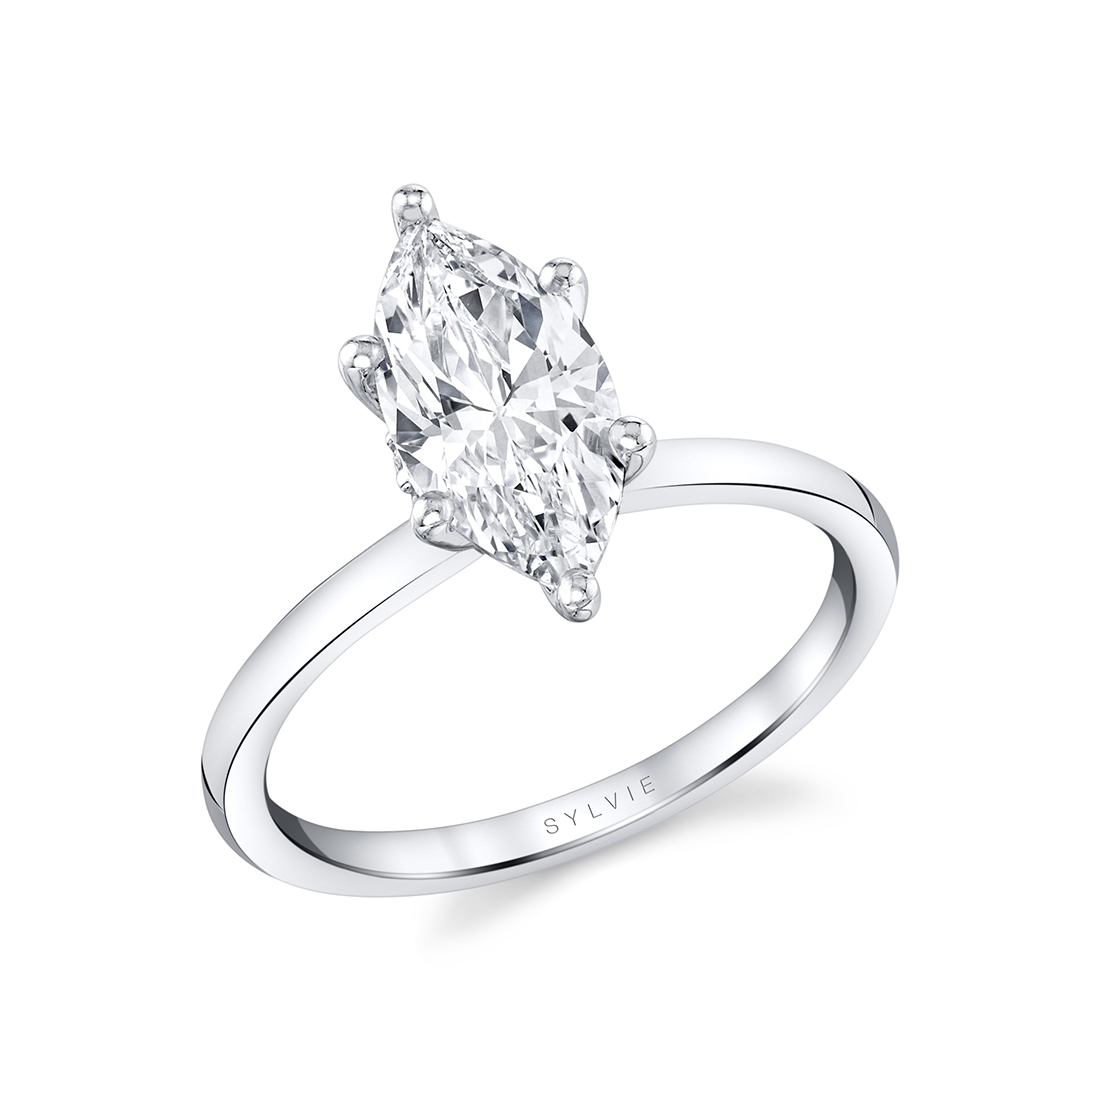 Simple solitaire engagement ring